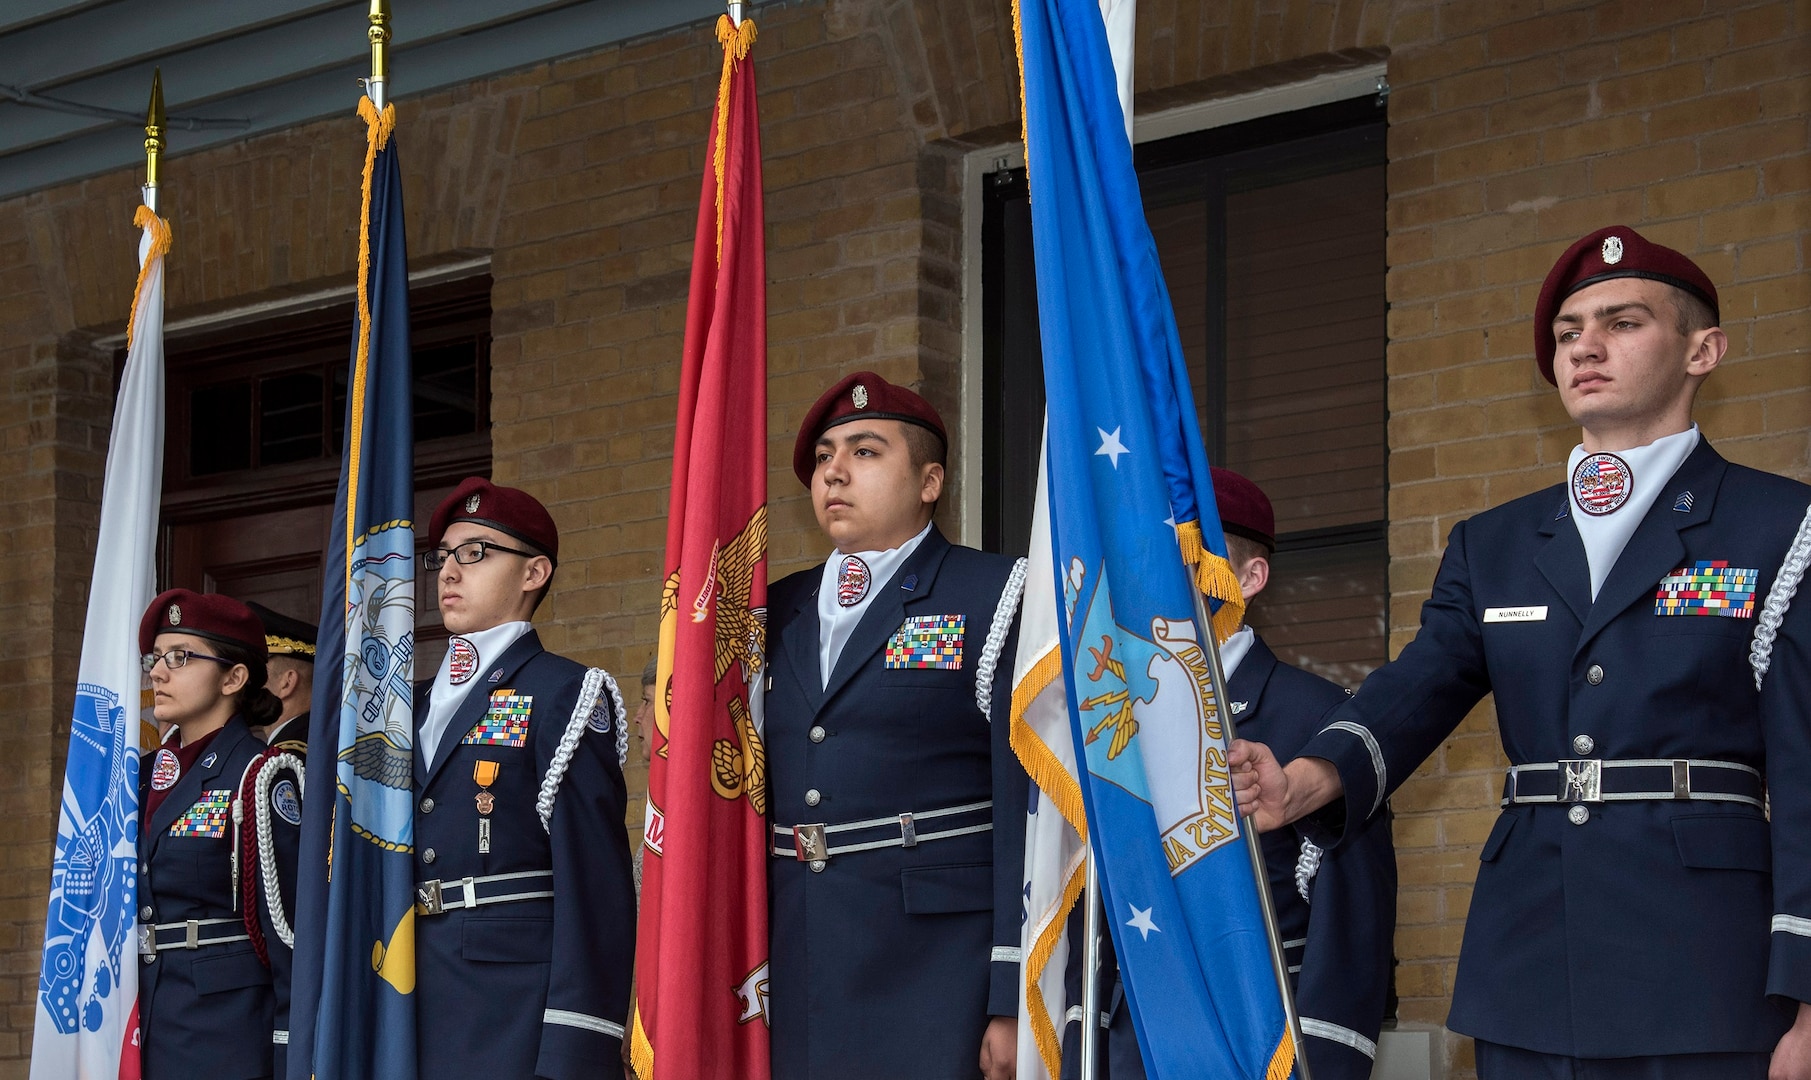 Members of the Pearsall High School Air Force Junior ROTC present the colors of each military service during a medley of armed force songs at the end of the celebration of the 108th anniversary of the first military flight made by Army Lt. Benjamin Foulois at Joint Base San Antonio-Fort Sam Houston on March 2, 1910.